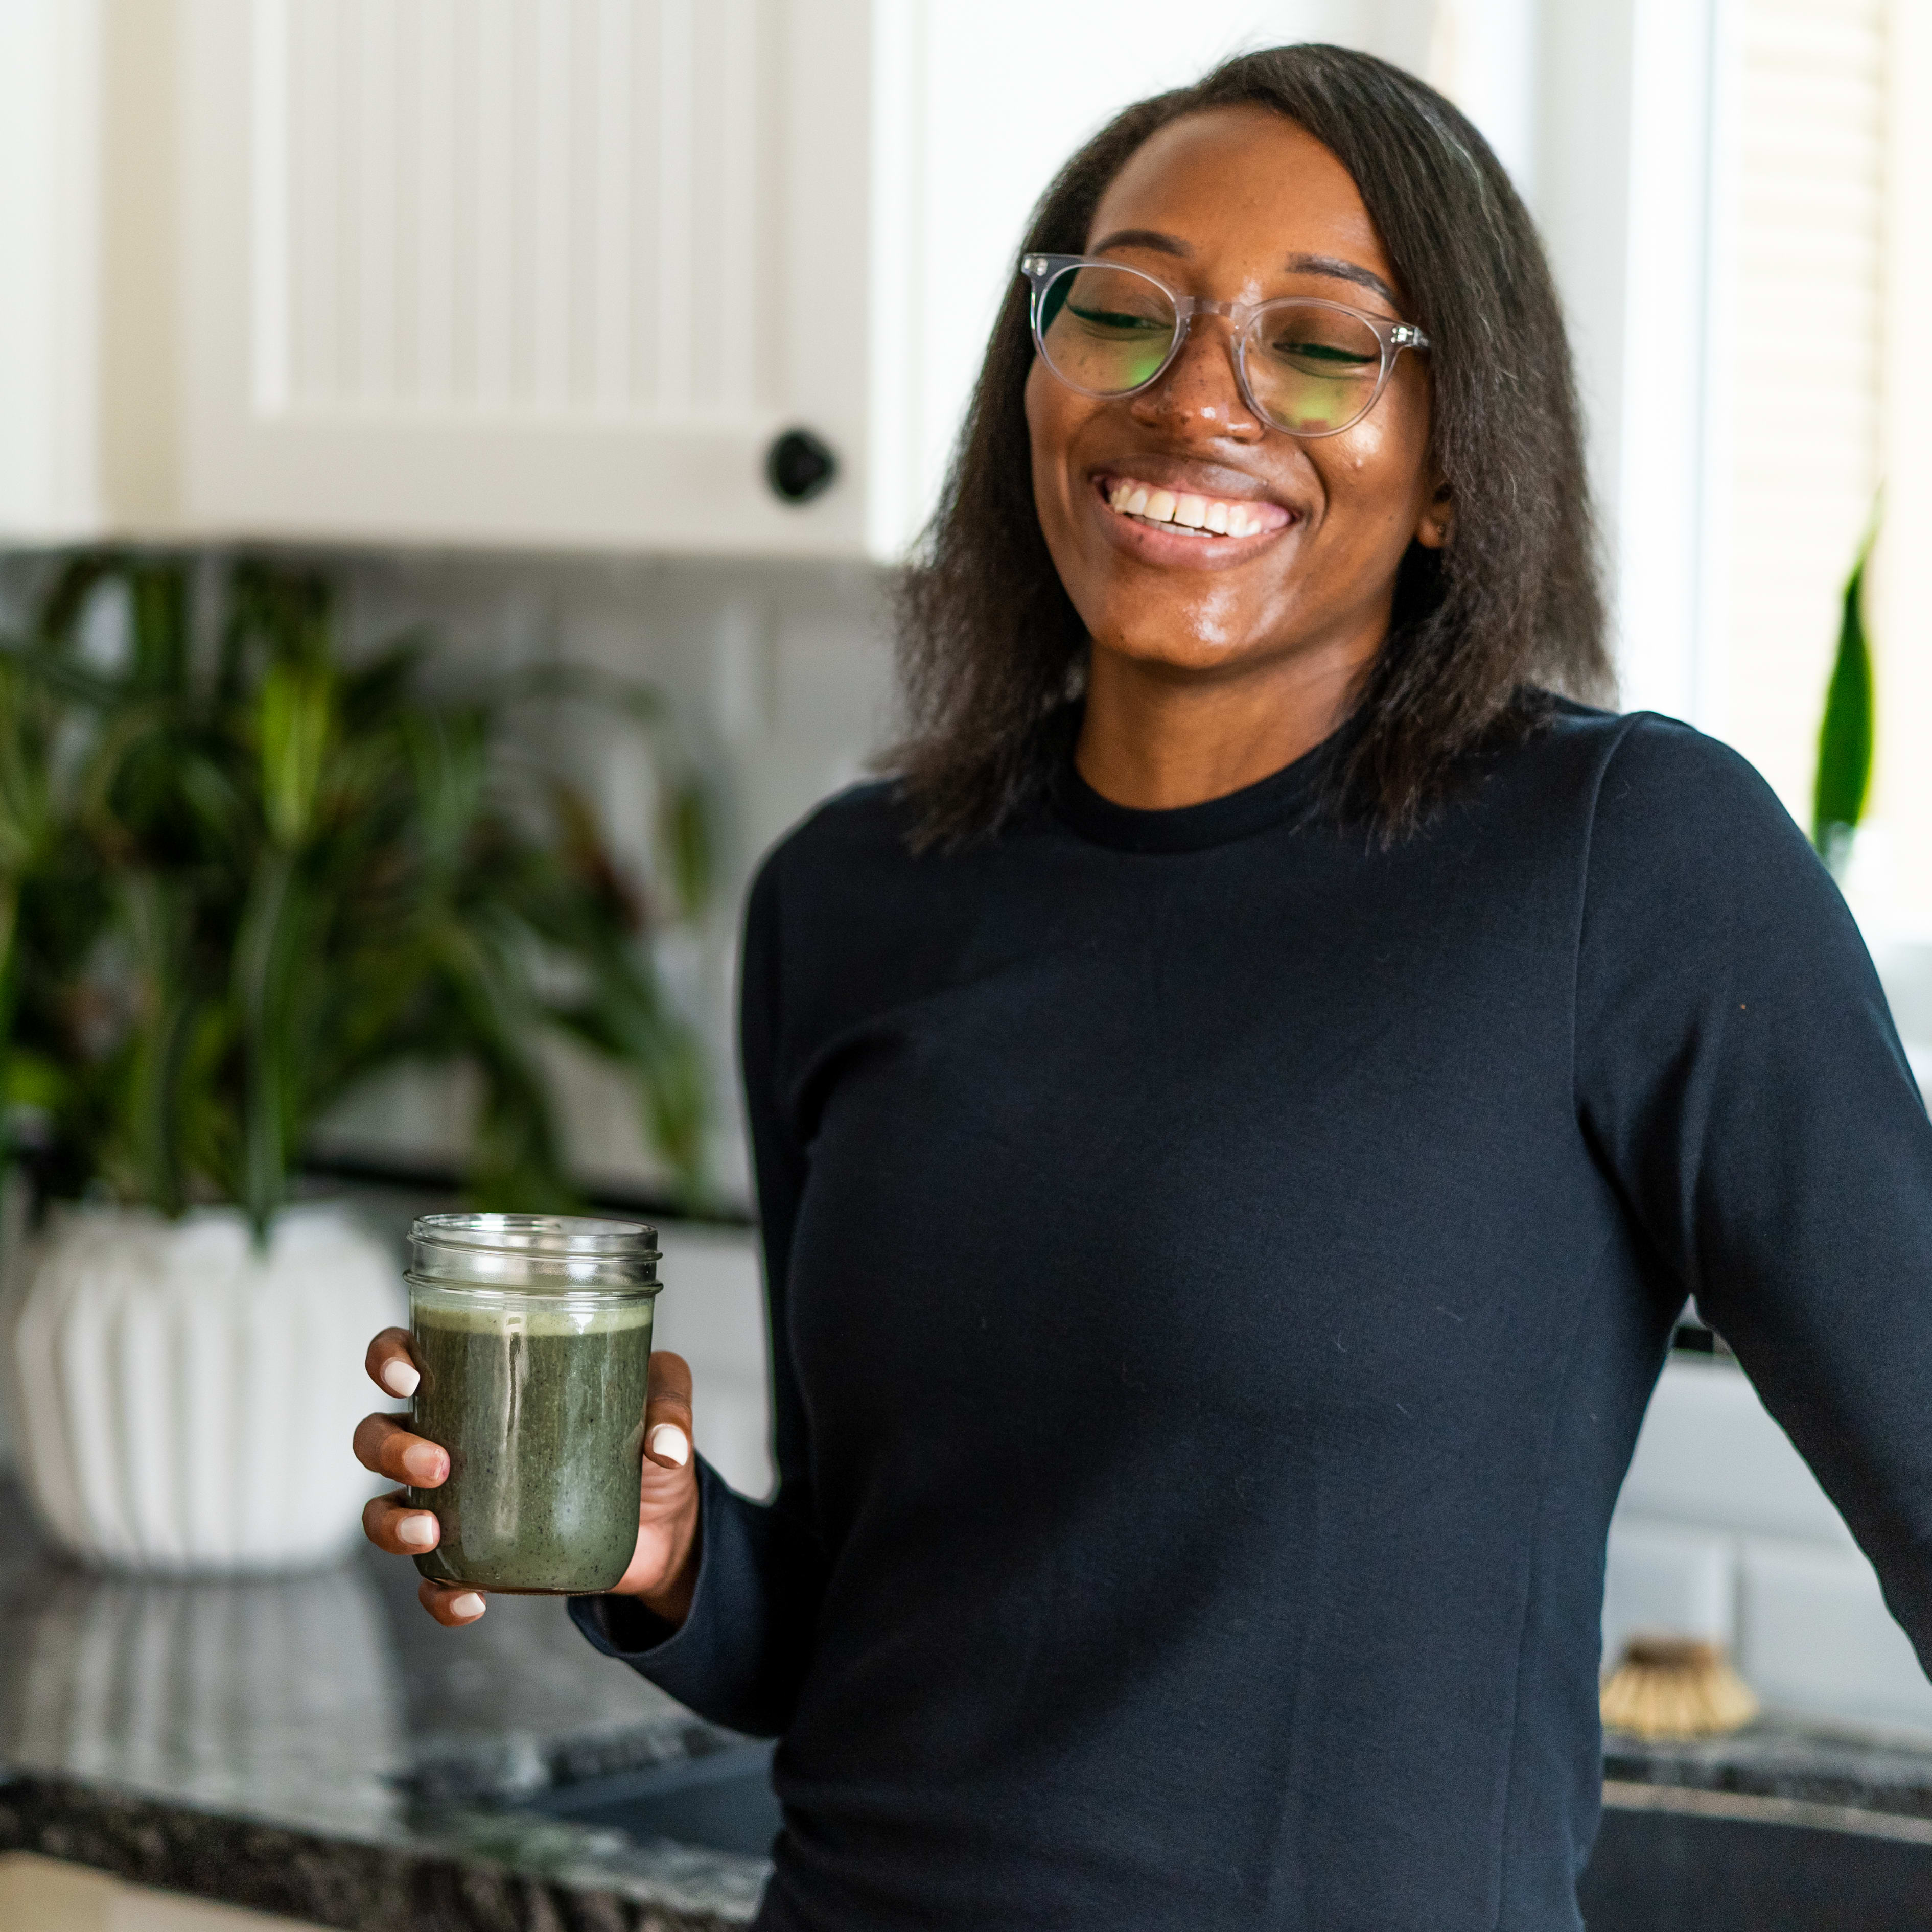 Smiling woman holding a glass with a green smoothy inside.